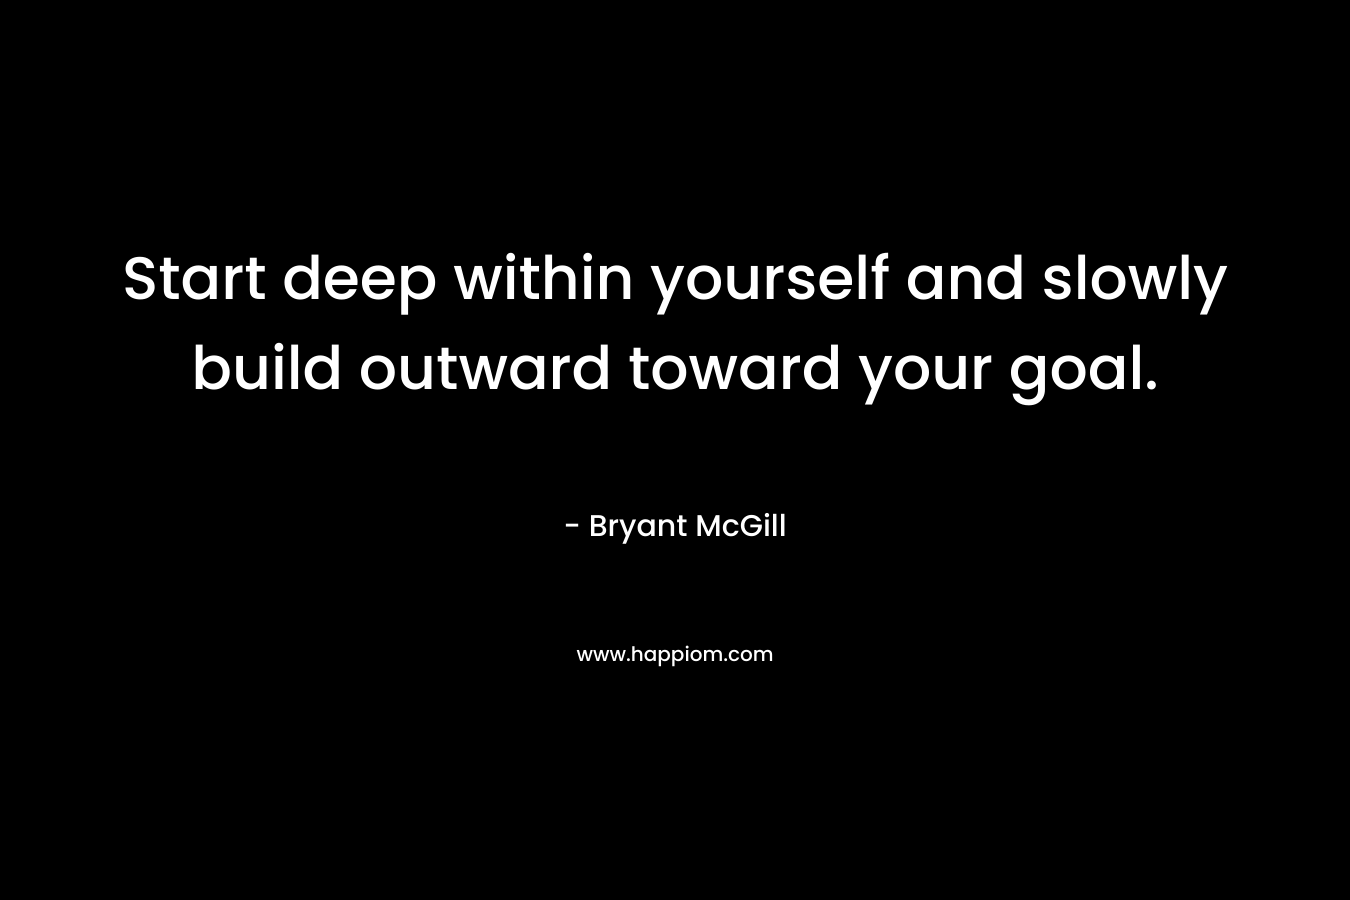 Start deep within yourself and slowly build outward toward your goal.